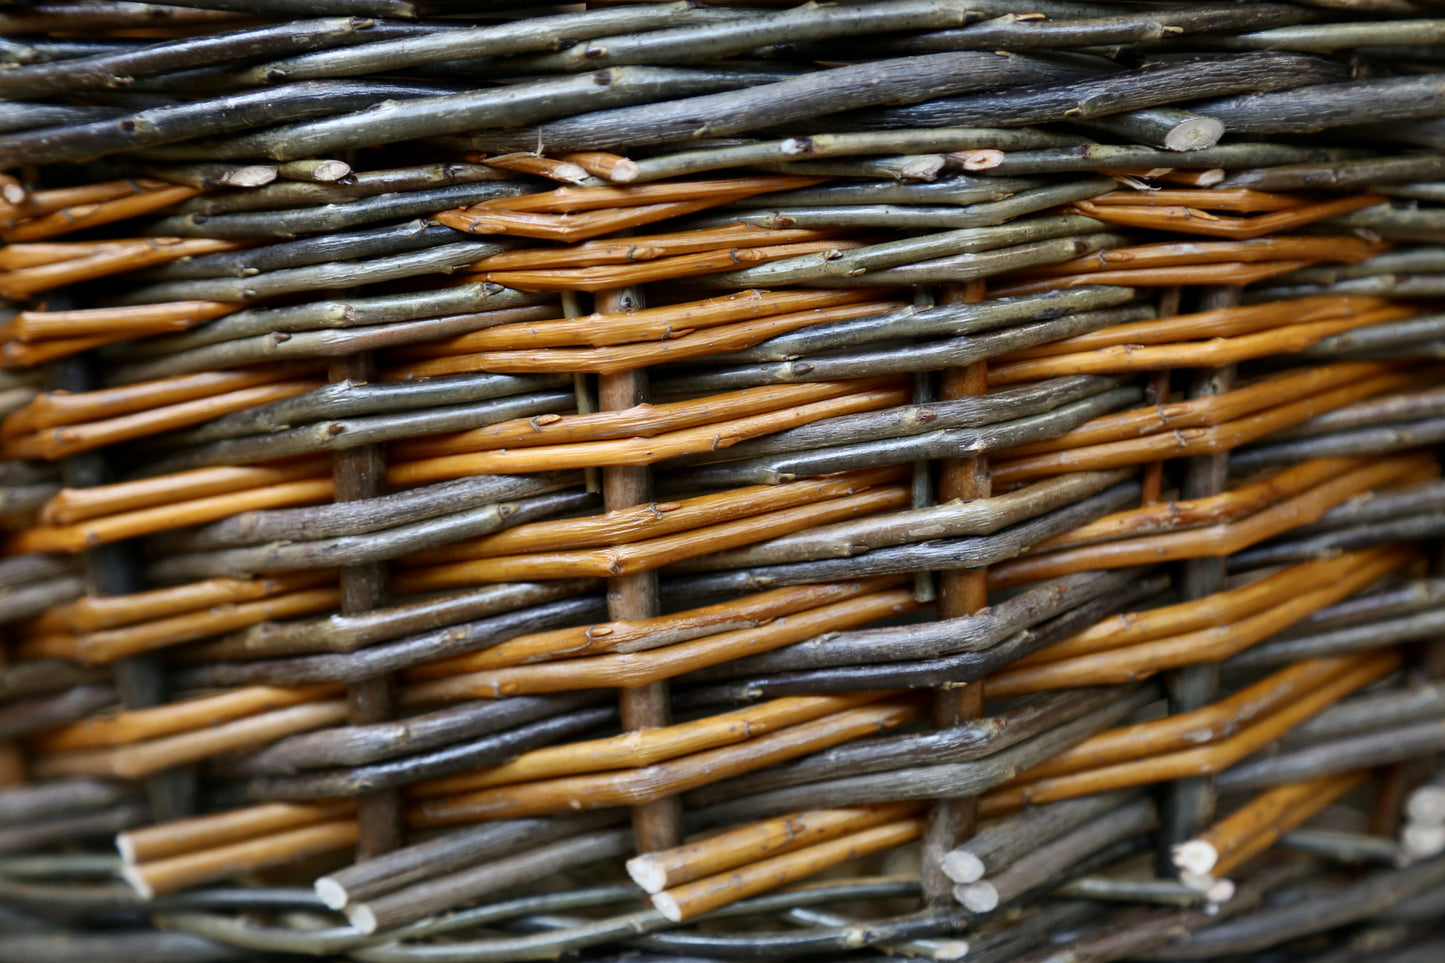 Hand woven willow laundry hamper